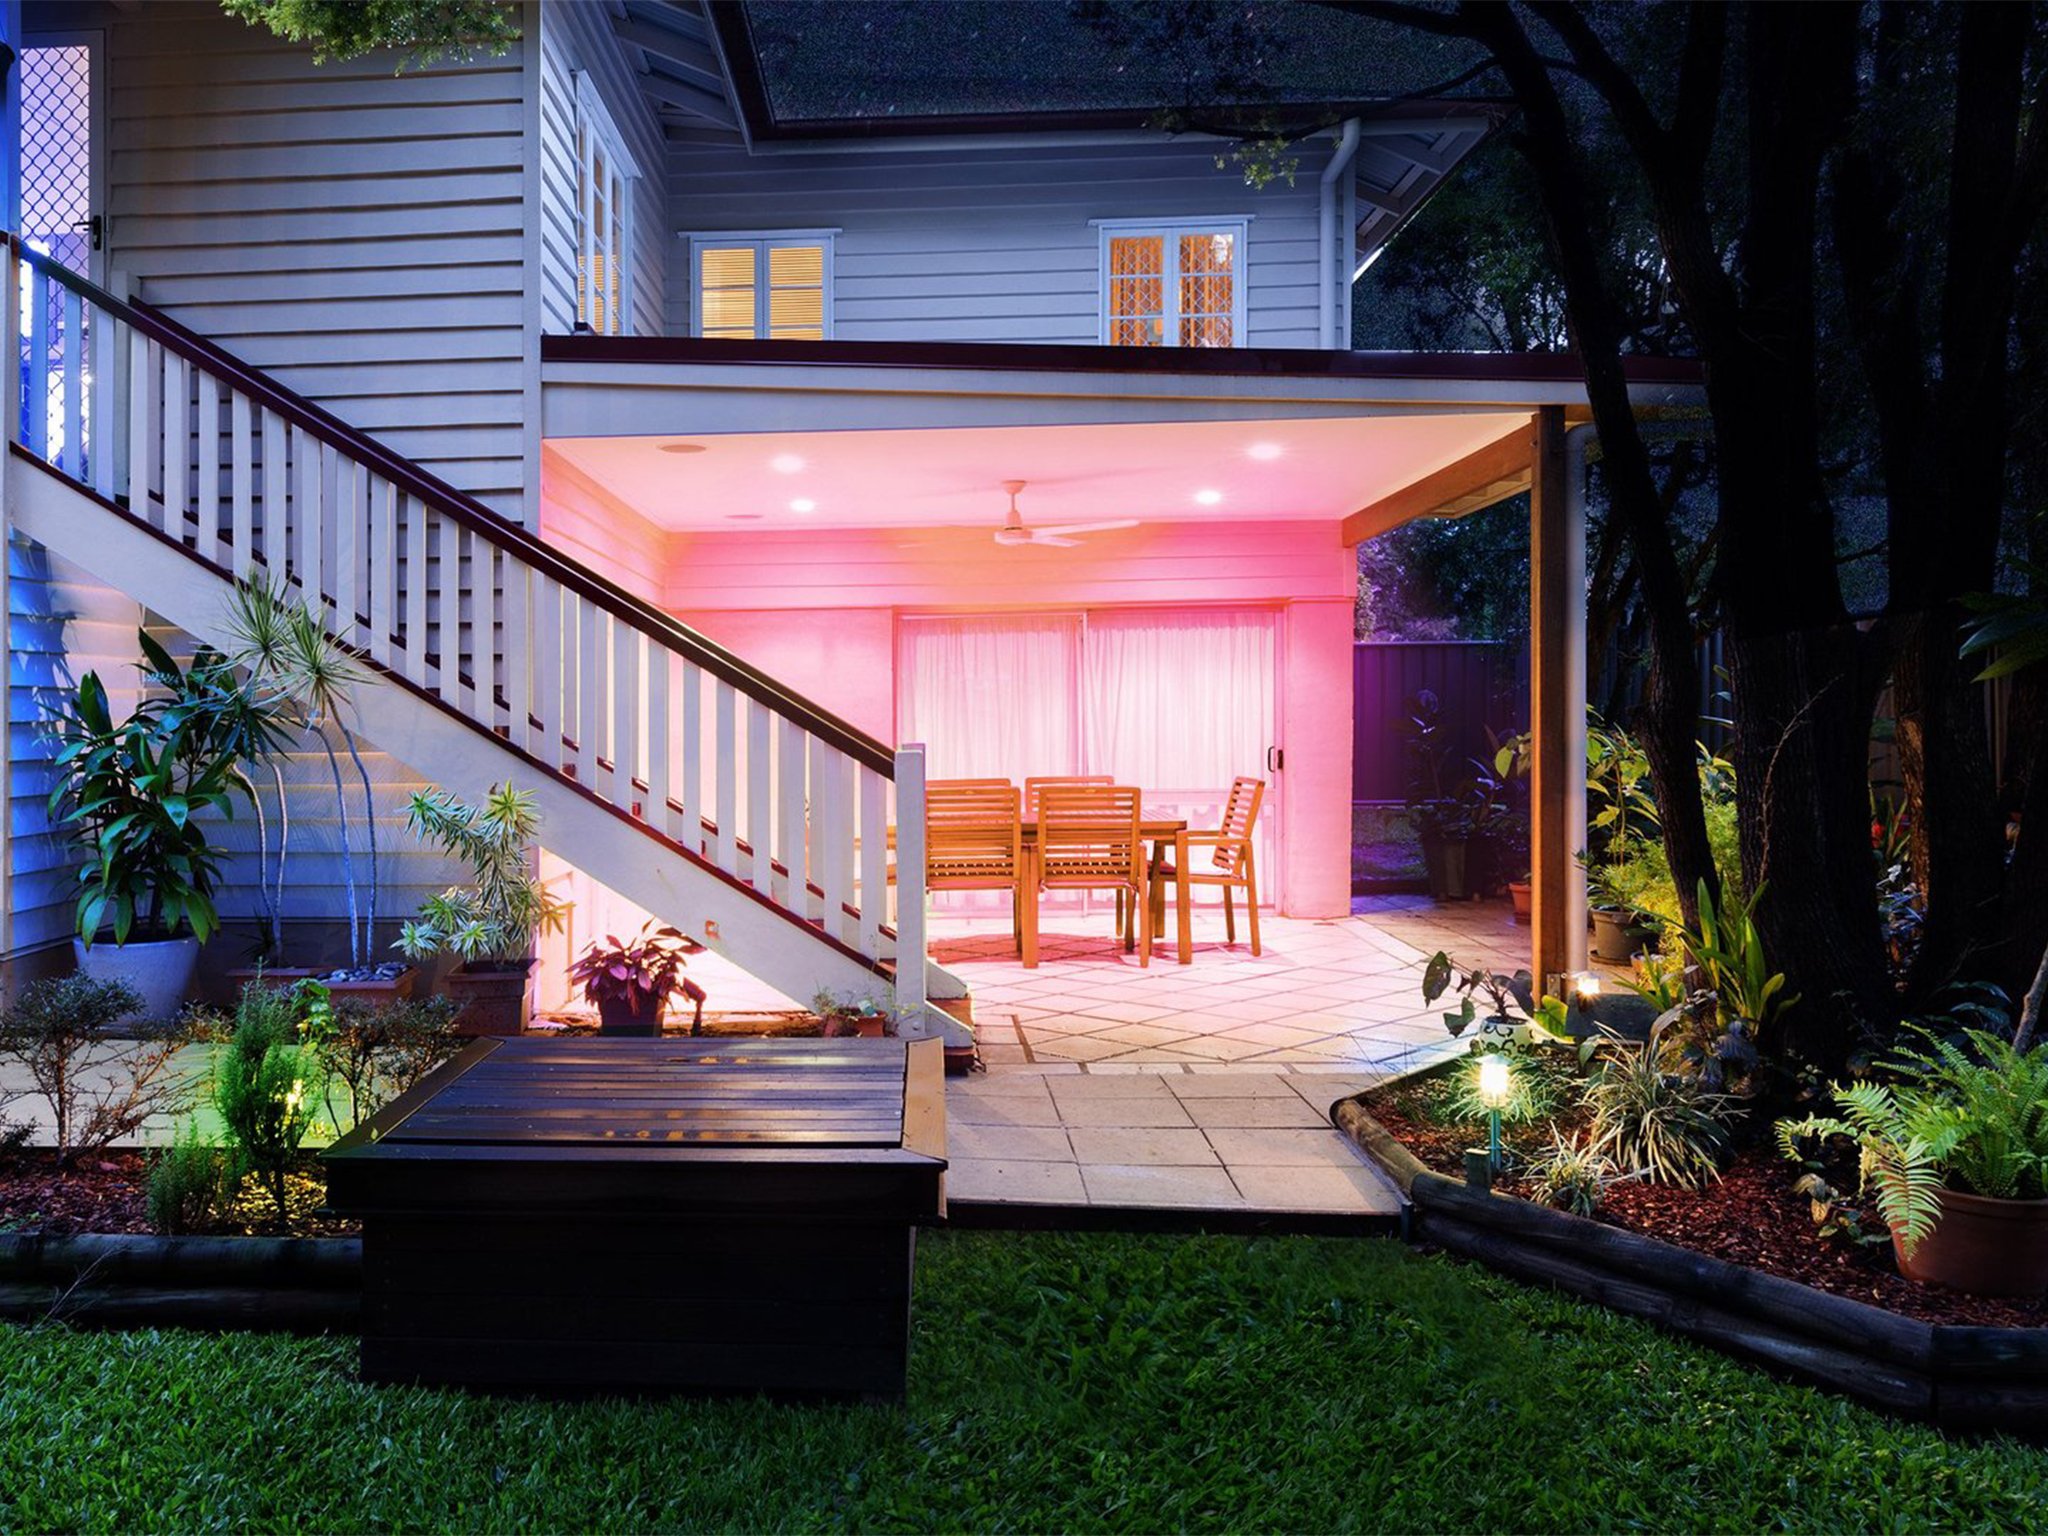 Lifx Br30s Outdoors Lifestyle